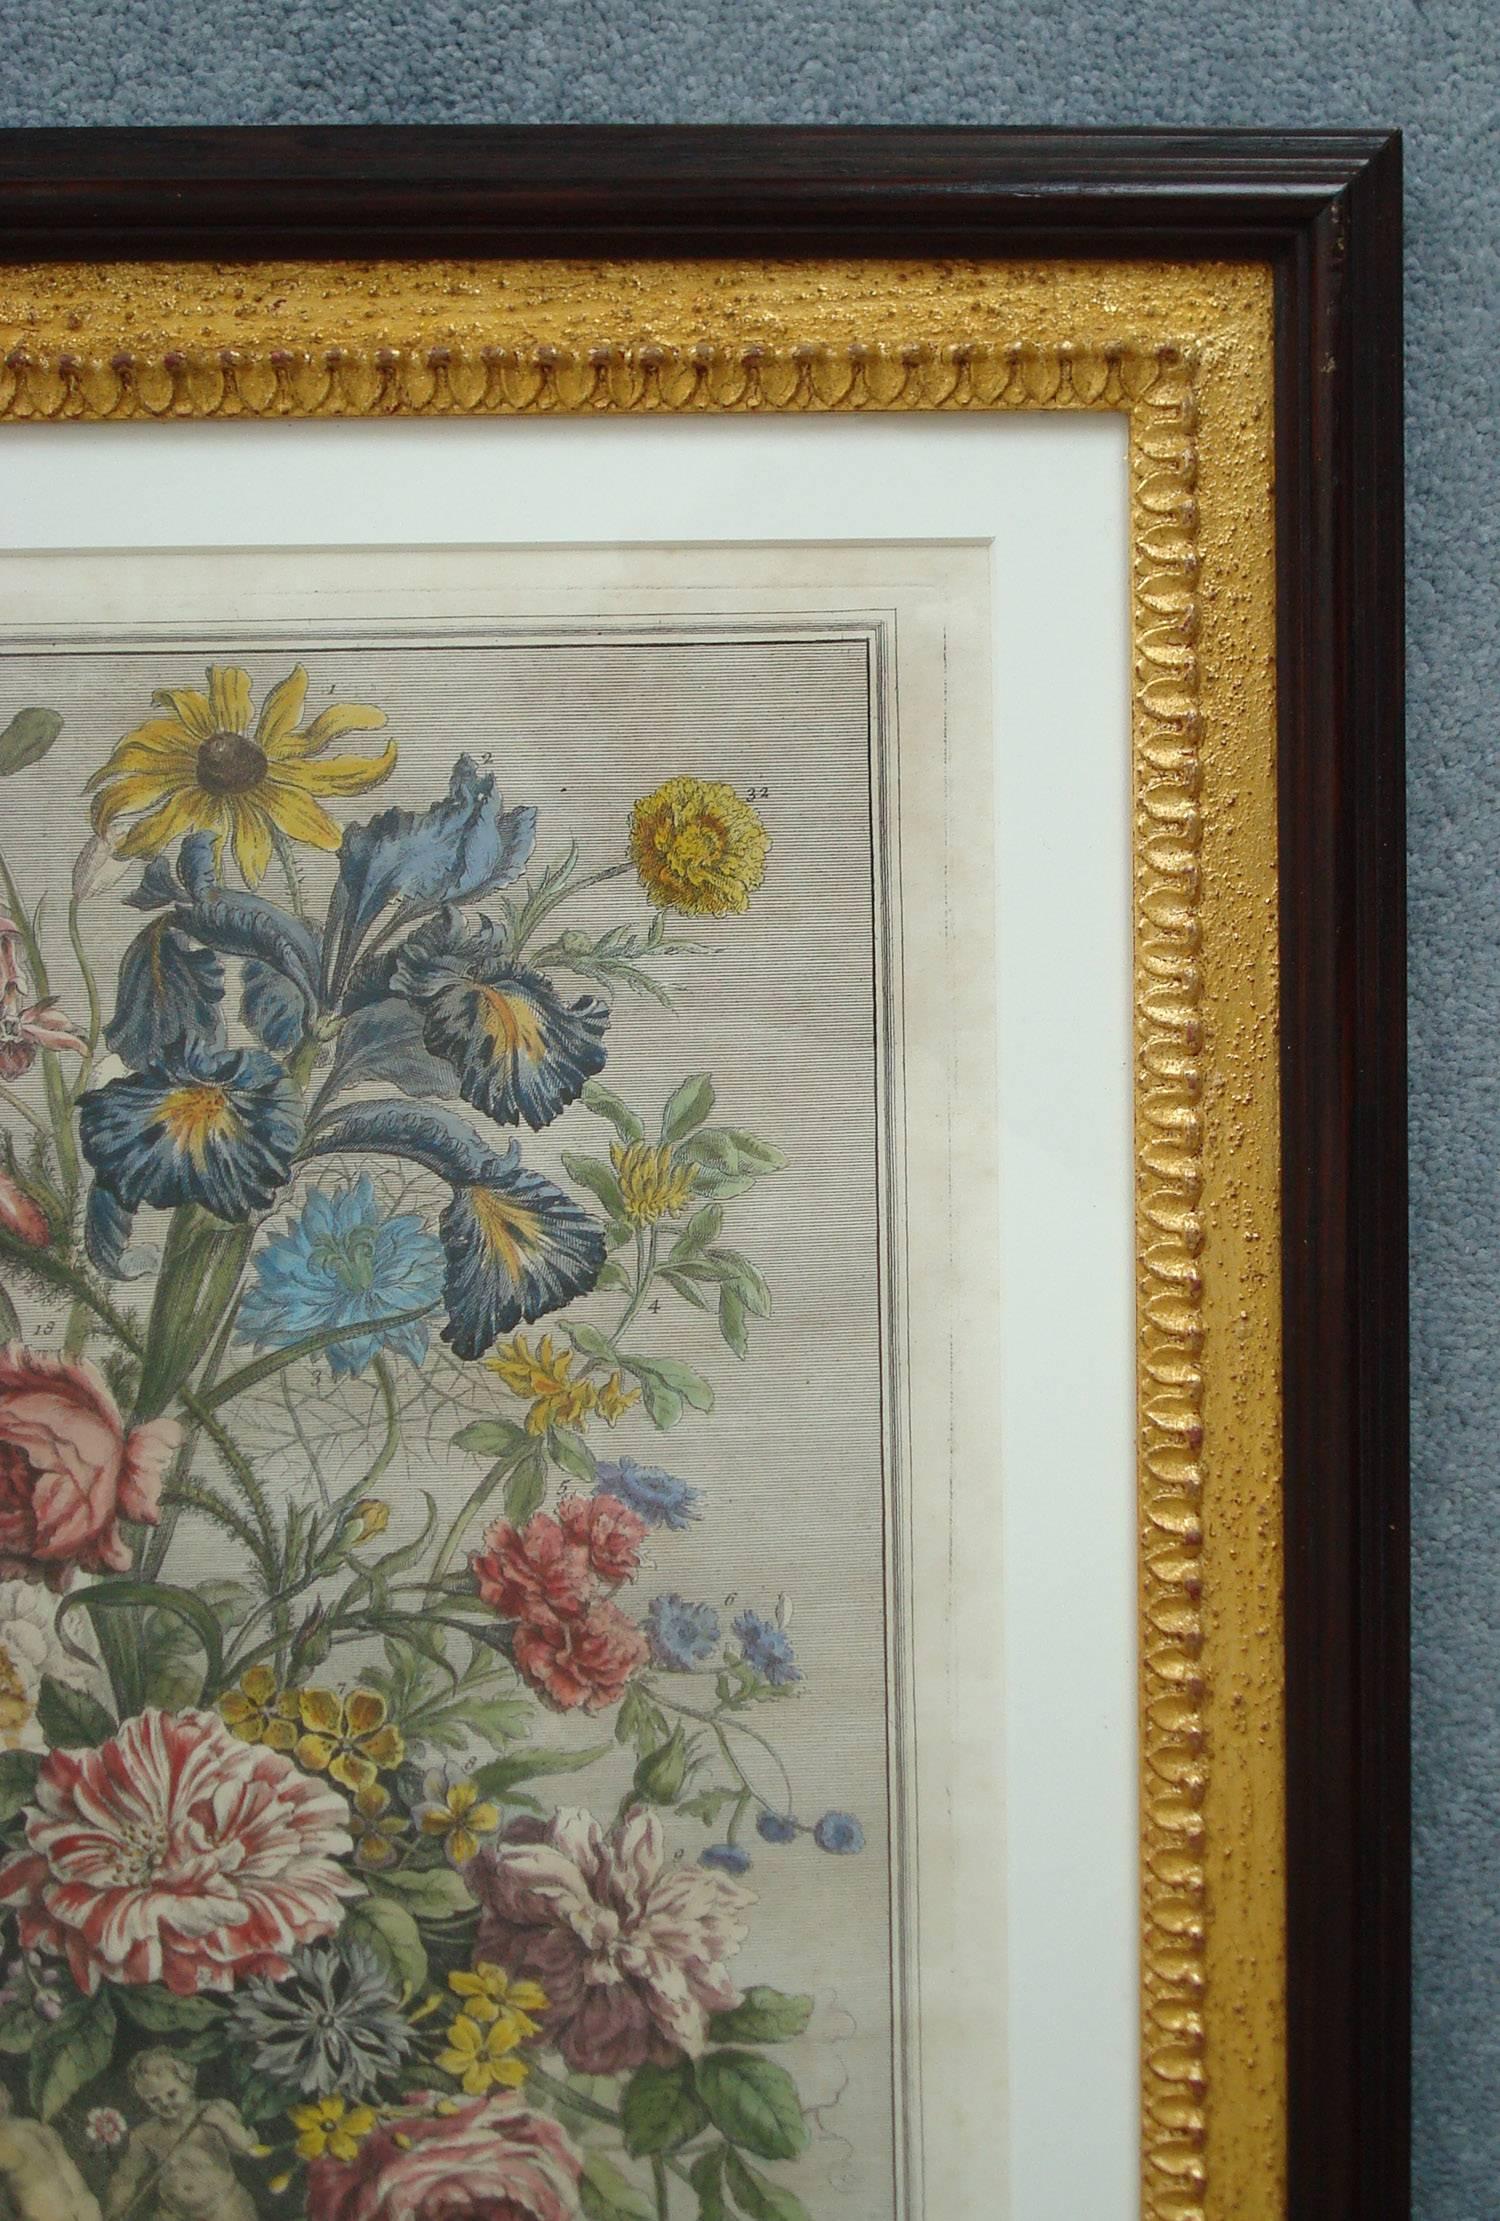 12 months of flowers.
The set of 12 colored engravings by H Fletcher from paintings by Pieter Casteels. Published by Robert Furber, Gardener at Kensington in 1730.

Image size 35.5 x 29.20cms.
Frame size 62 x 50cms.

The frames are recently